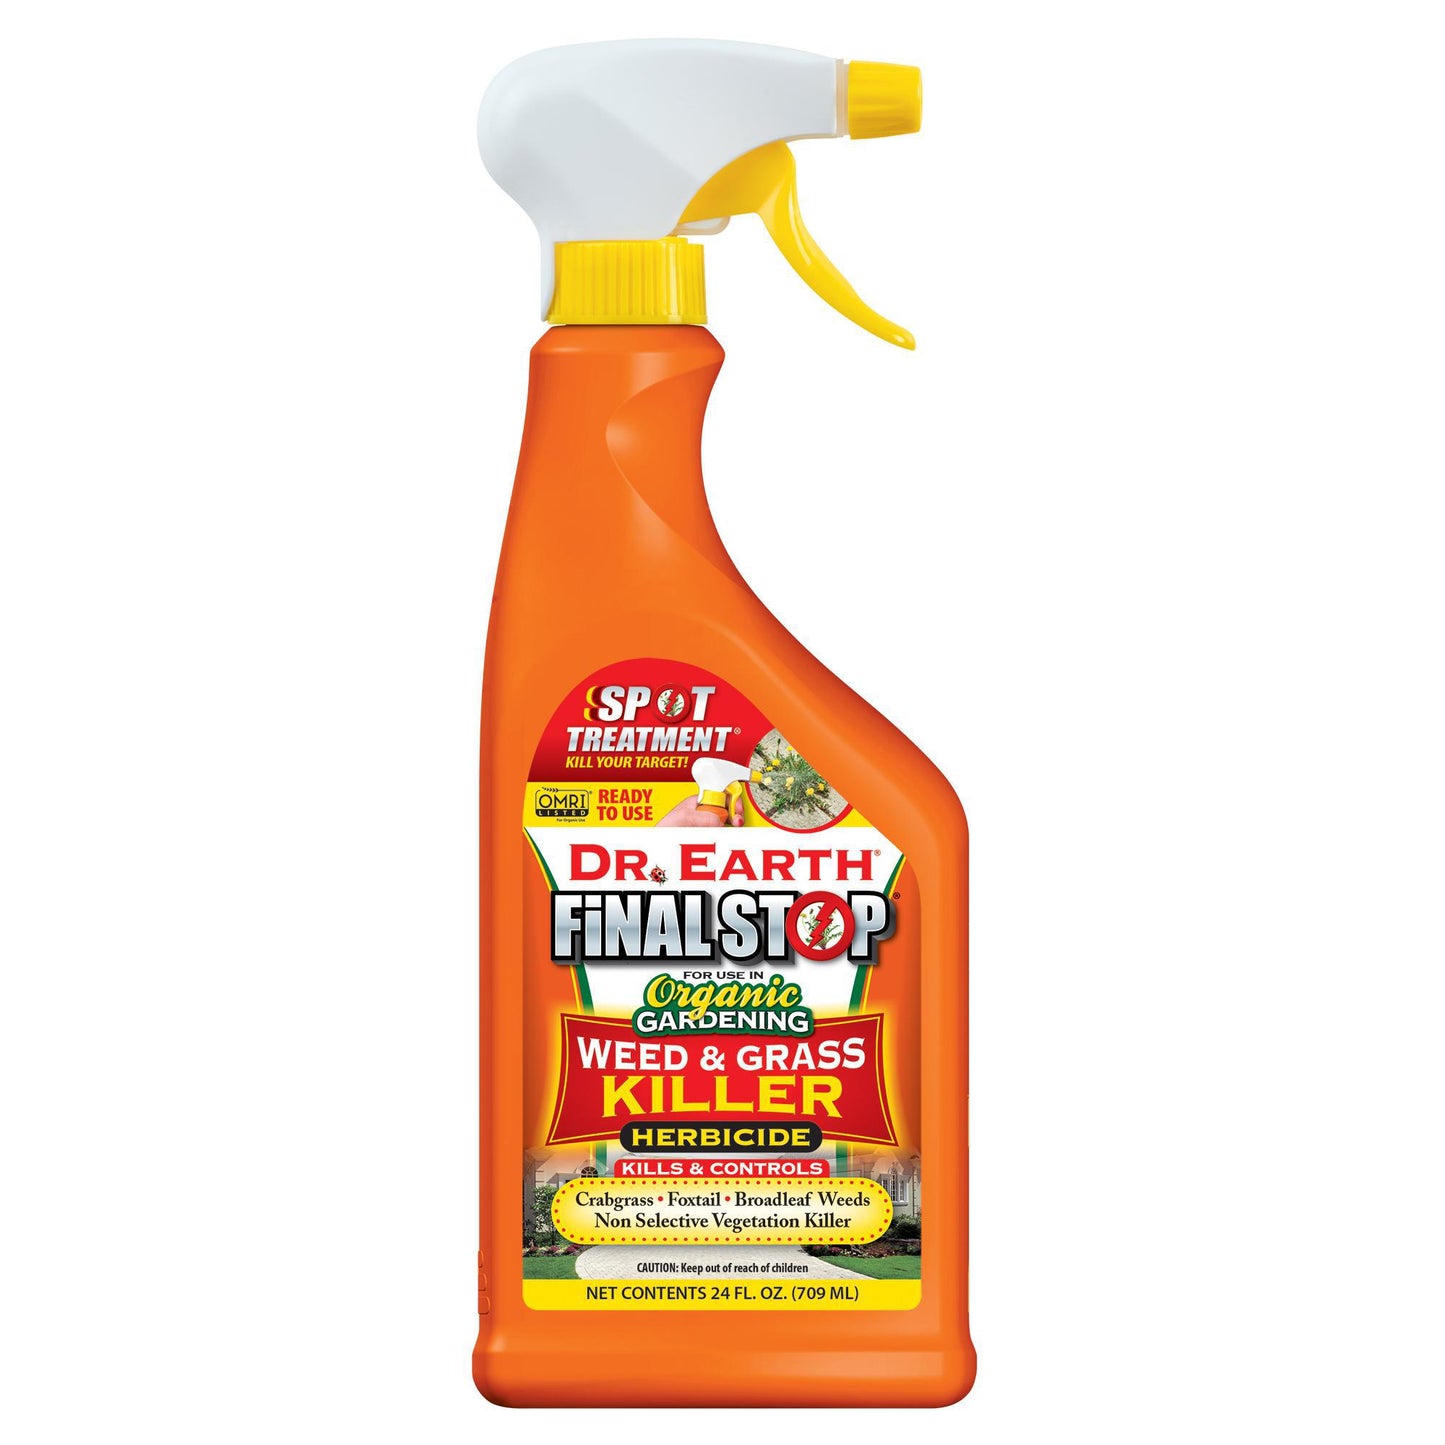 Dr. Earth Final Stop Weed & Grass Killer Herbicide Ready To Use 24oz